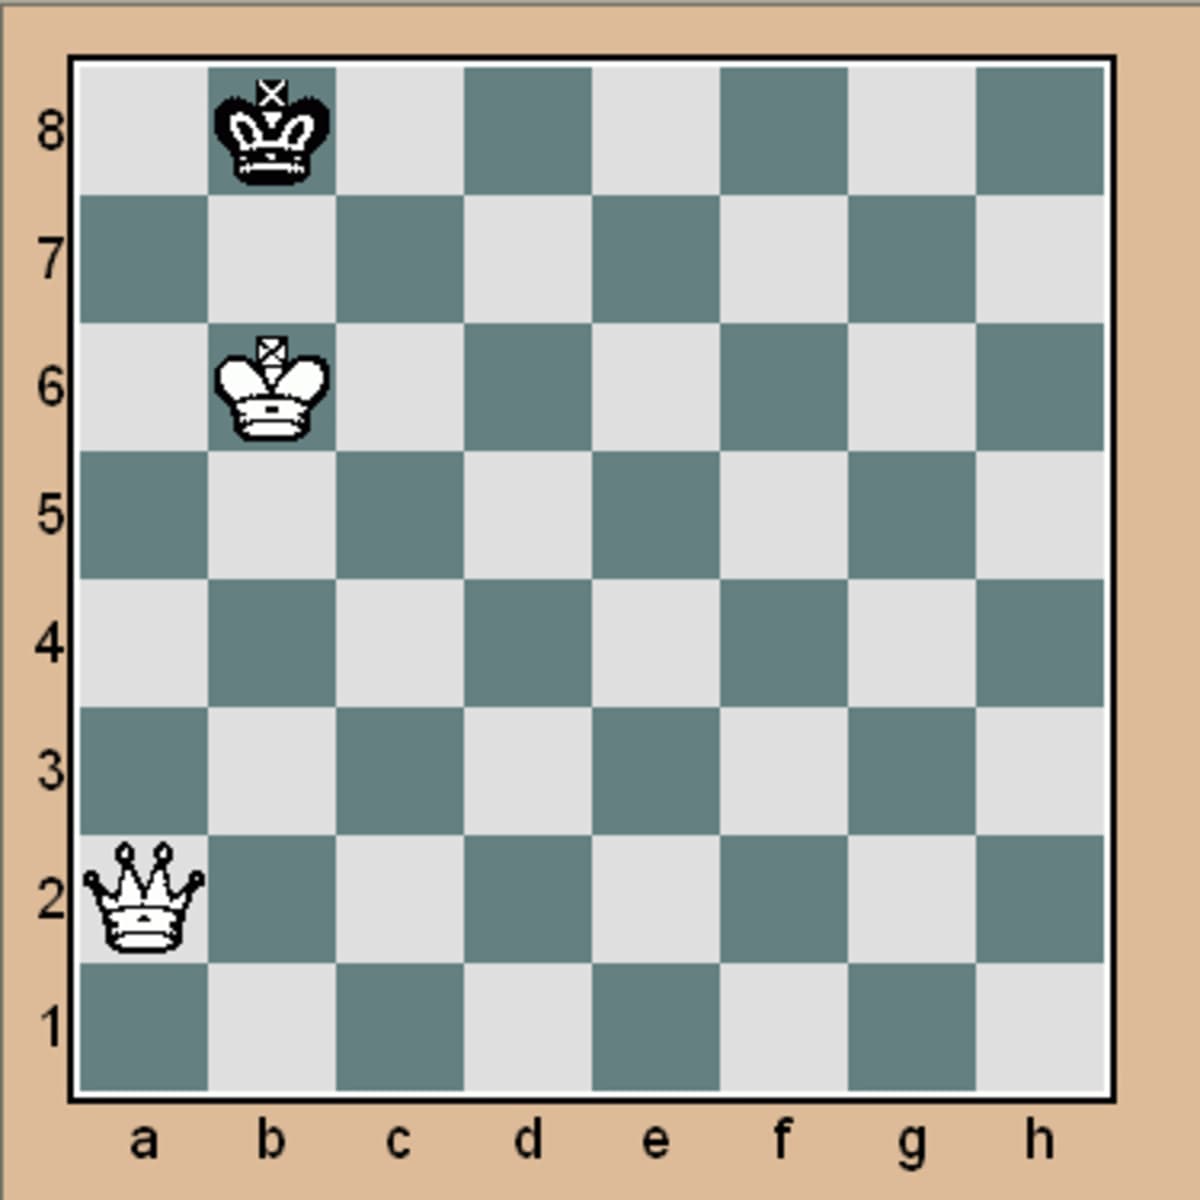 Just an easy chess puzzle, white to move and mate in 1 : r/chess